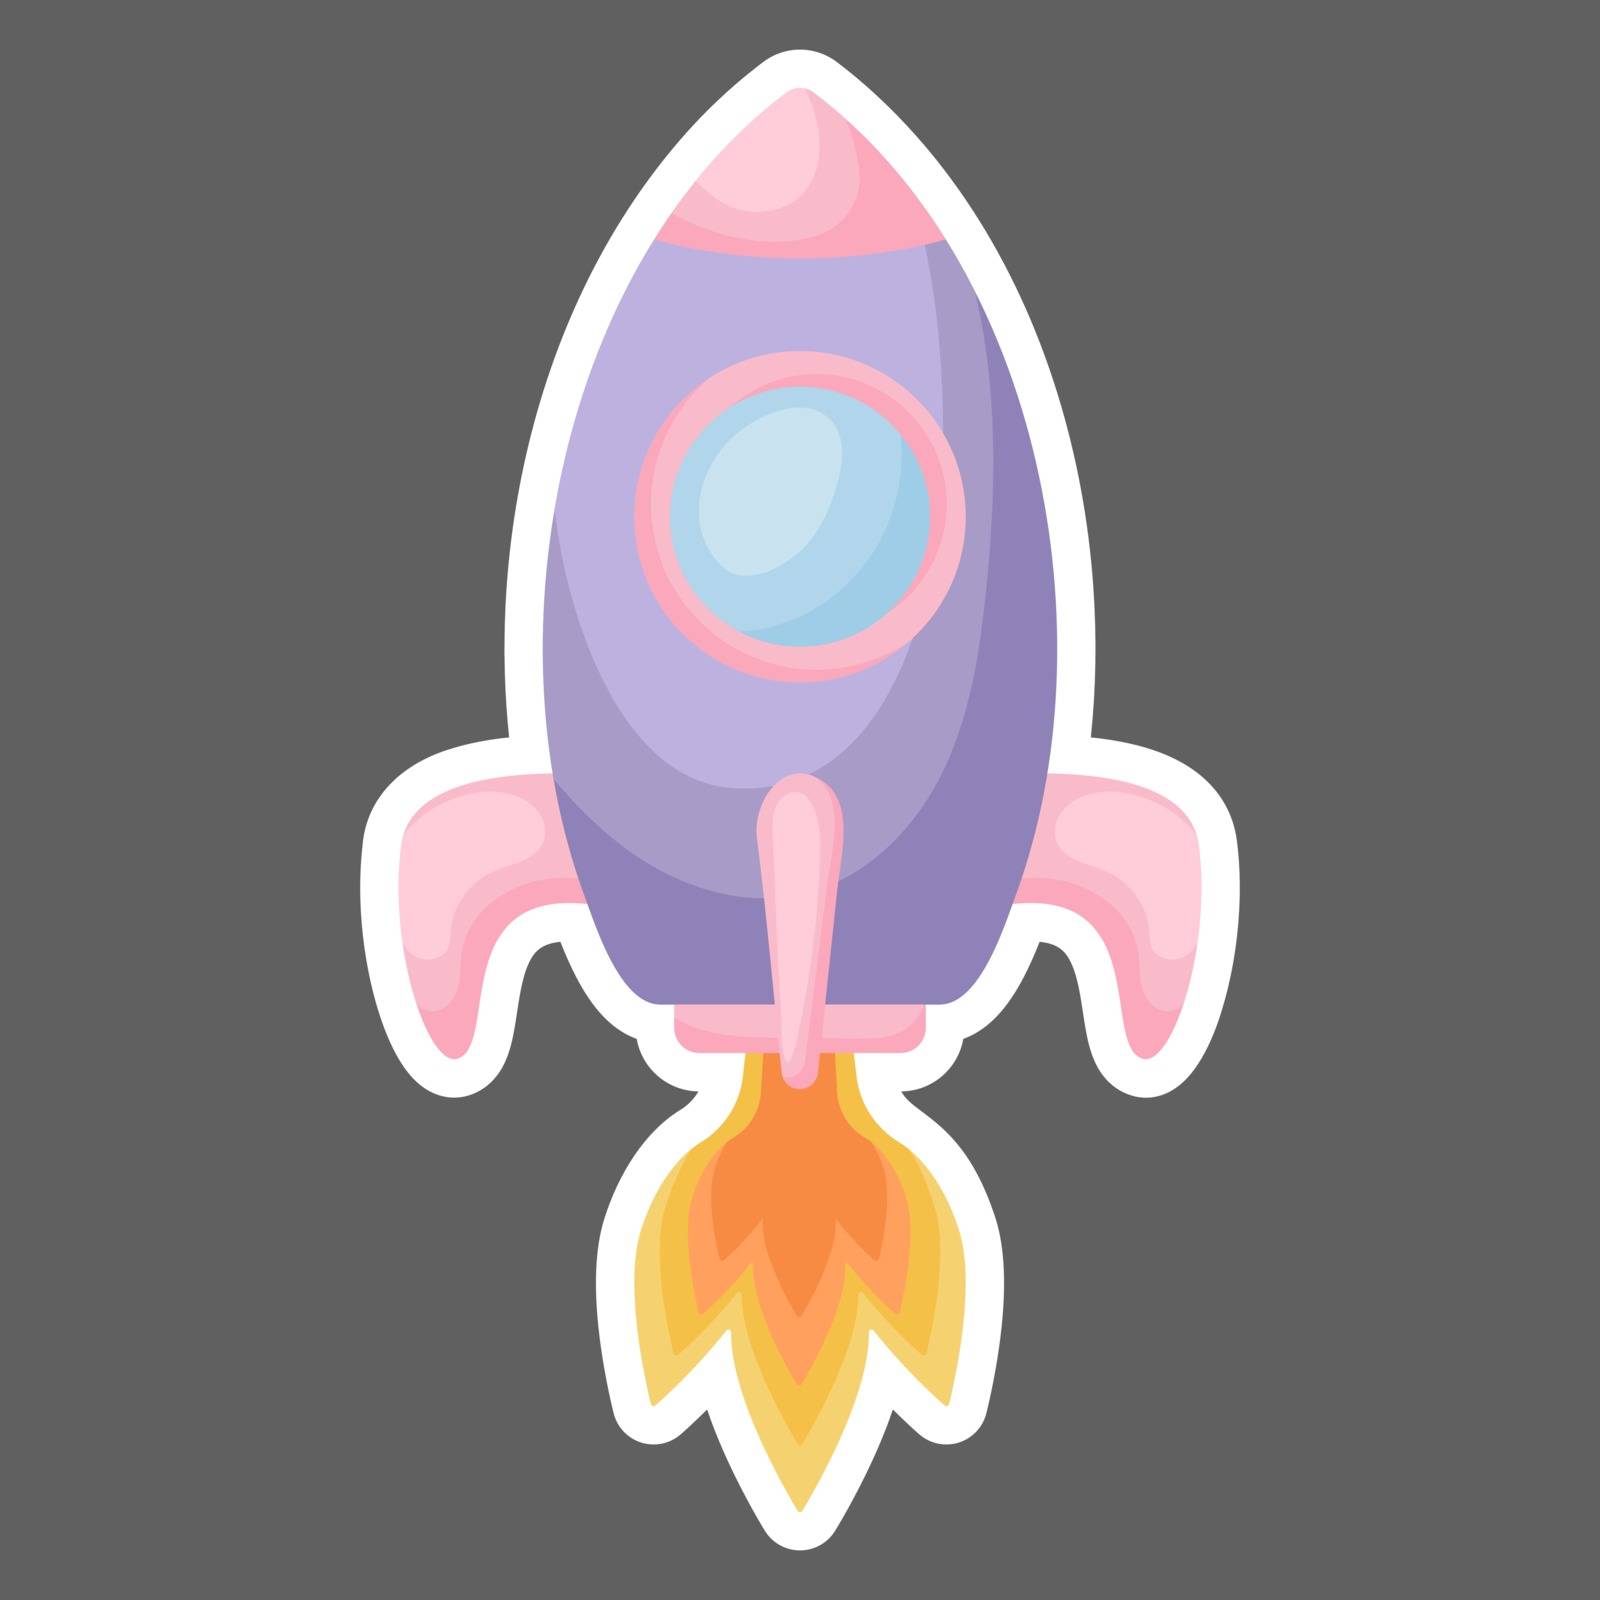 Bright cartoon purple-pink rocket with fire trace launched into space for design of notebook, cards, invitation. Cute sticker template decorated with cartoon image. Colorful vector stock illustration.